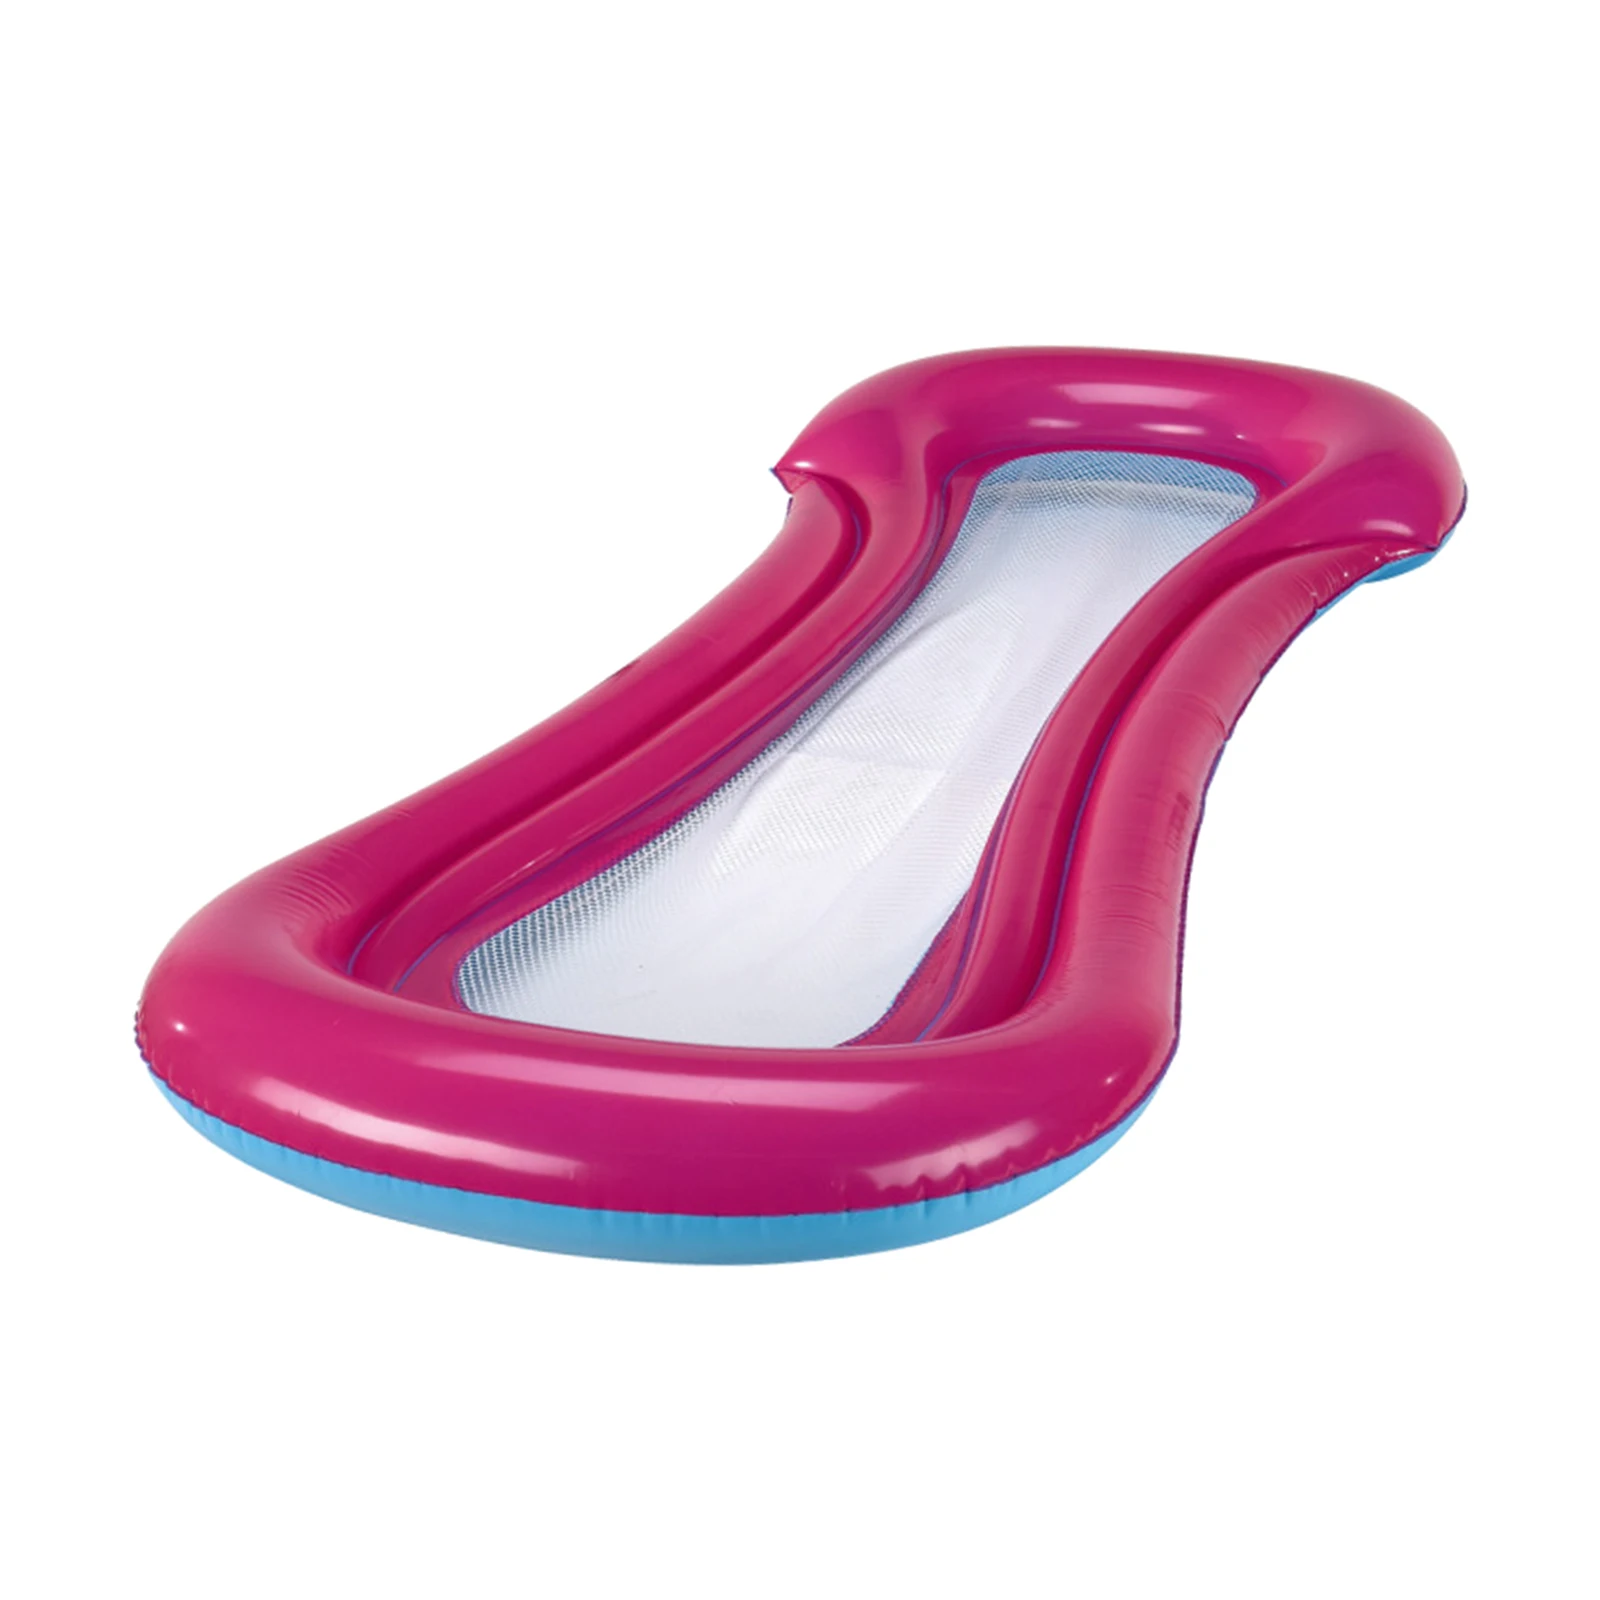 Pool Inflatable Bed Water Toy Women Men Floating Lounger Drifting Raft